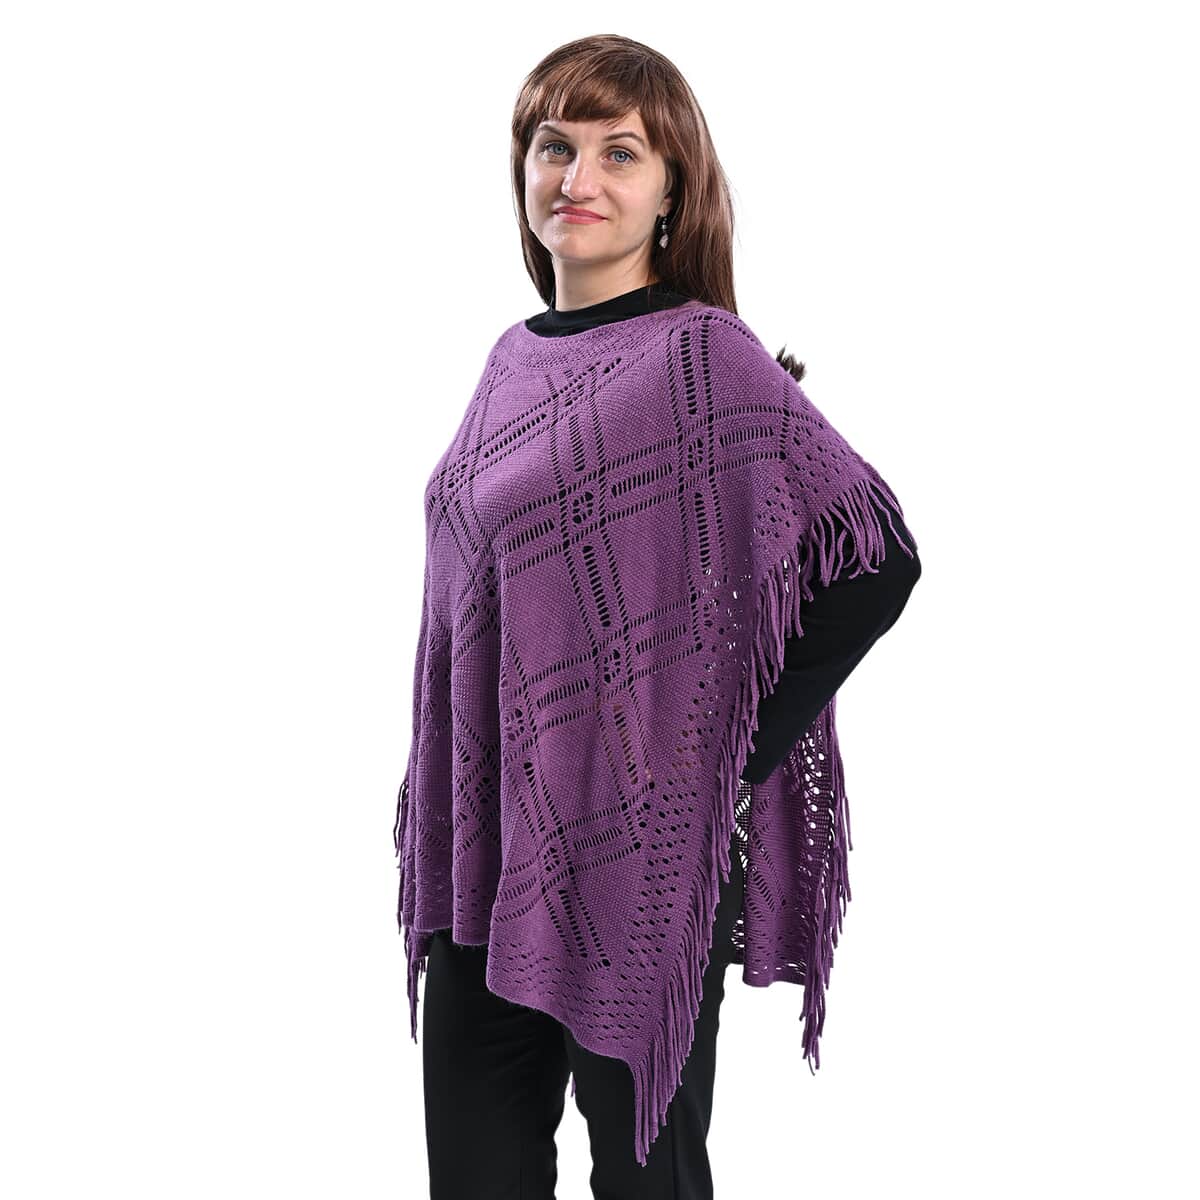 Passage Knitted Purple Poncho with Tassels (One Size Fits Most) image number 2